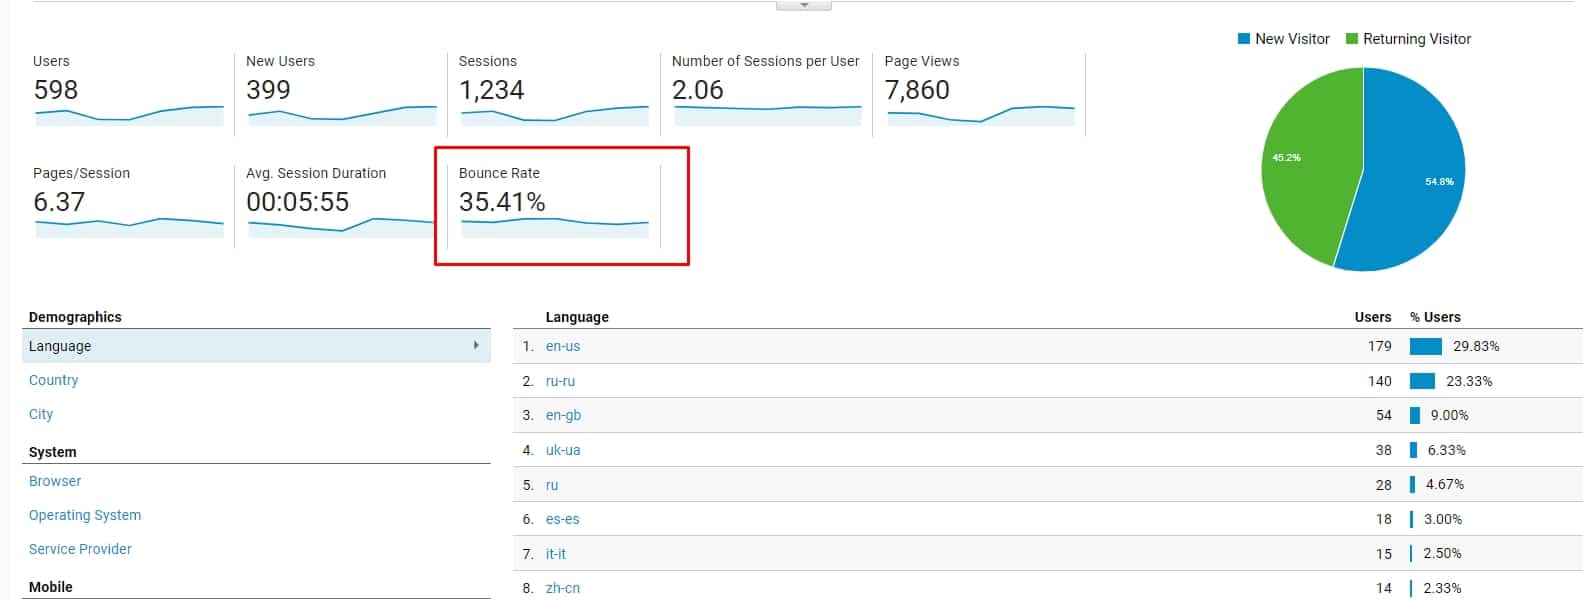 Google Analytics Conversion Rate and How to Check It 02